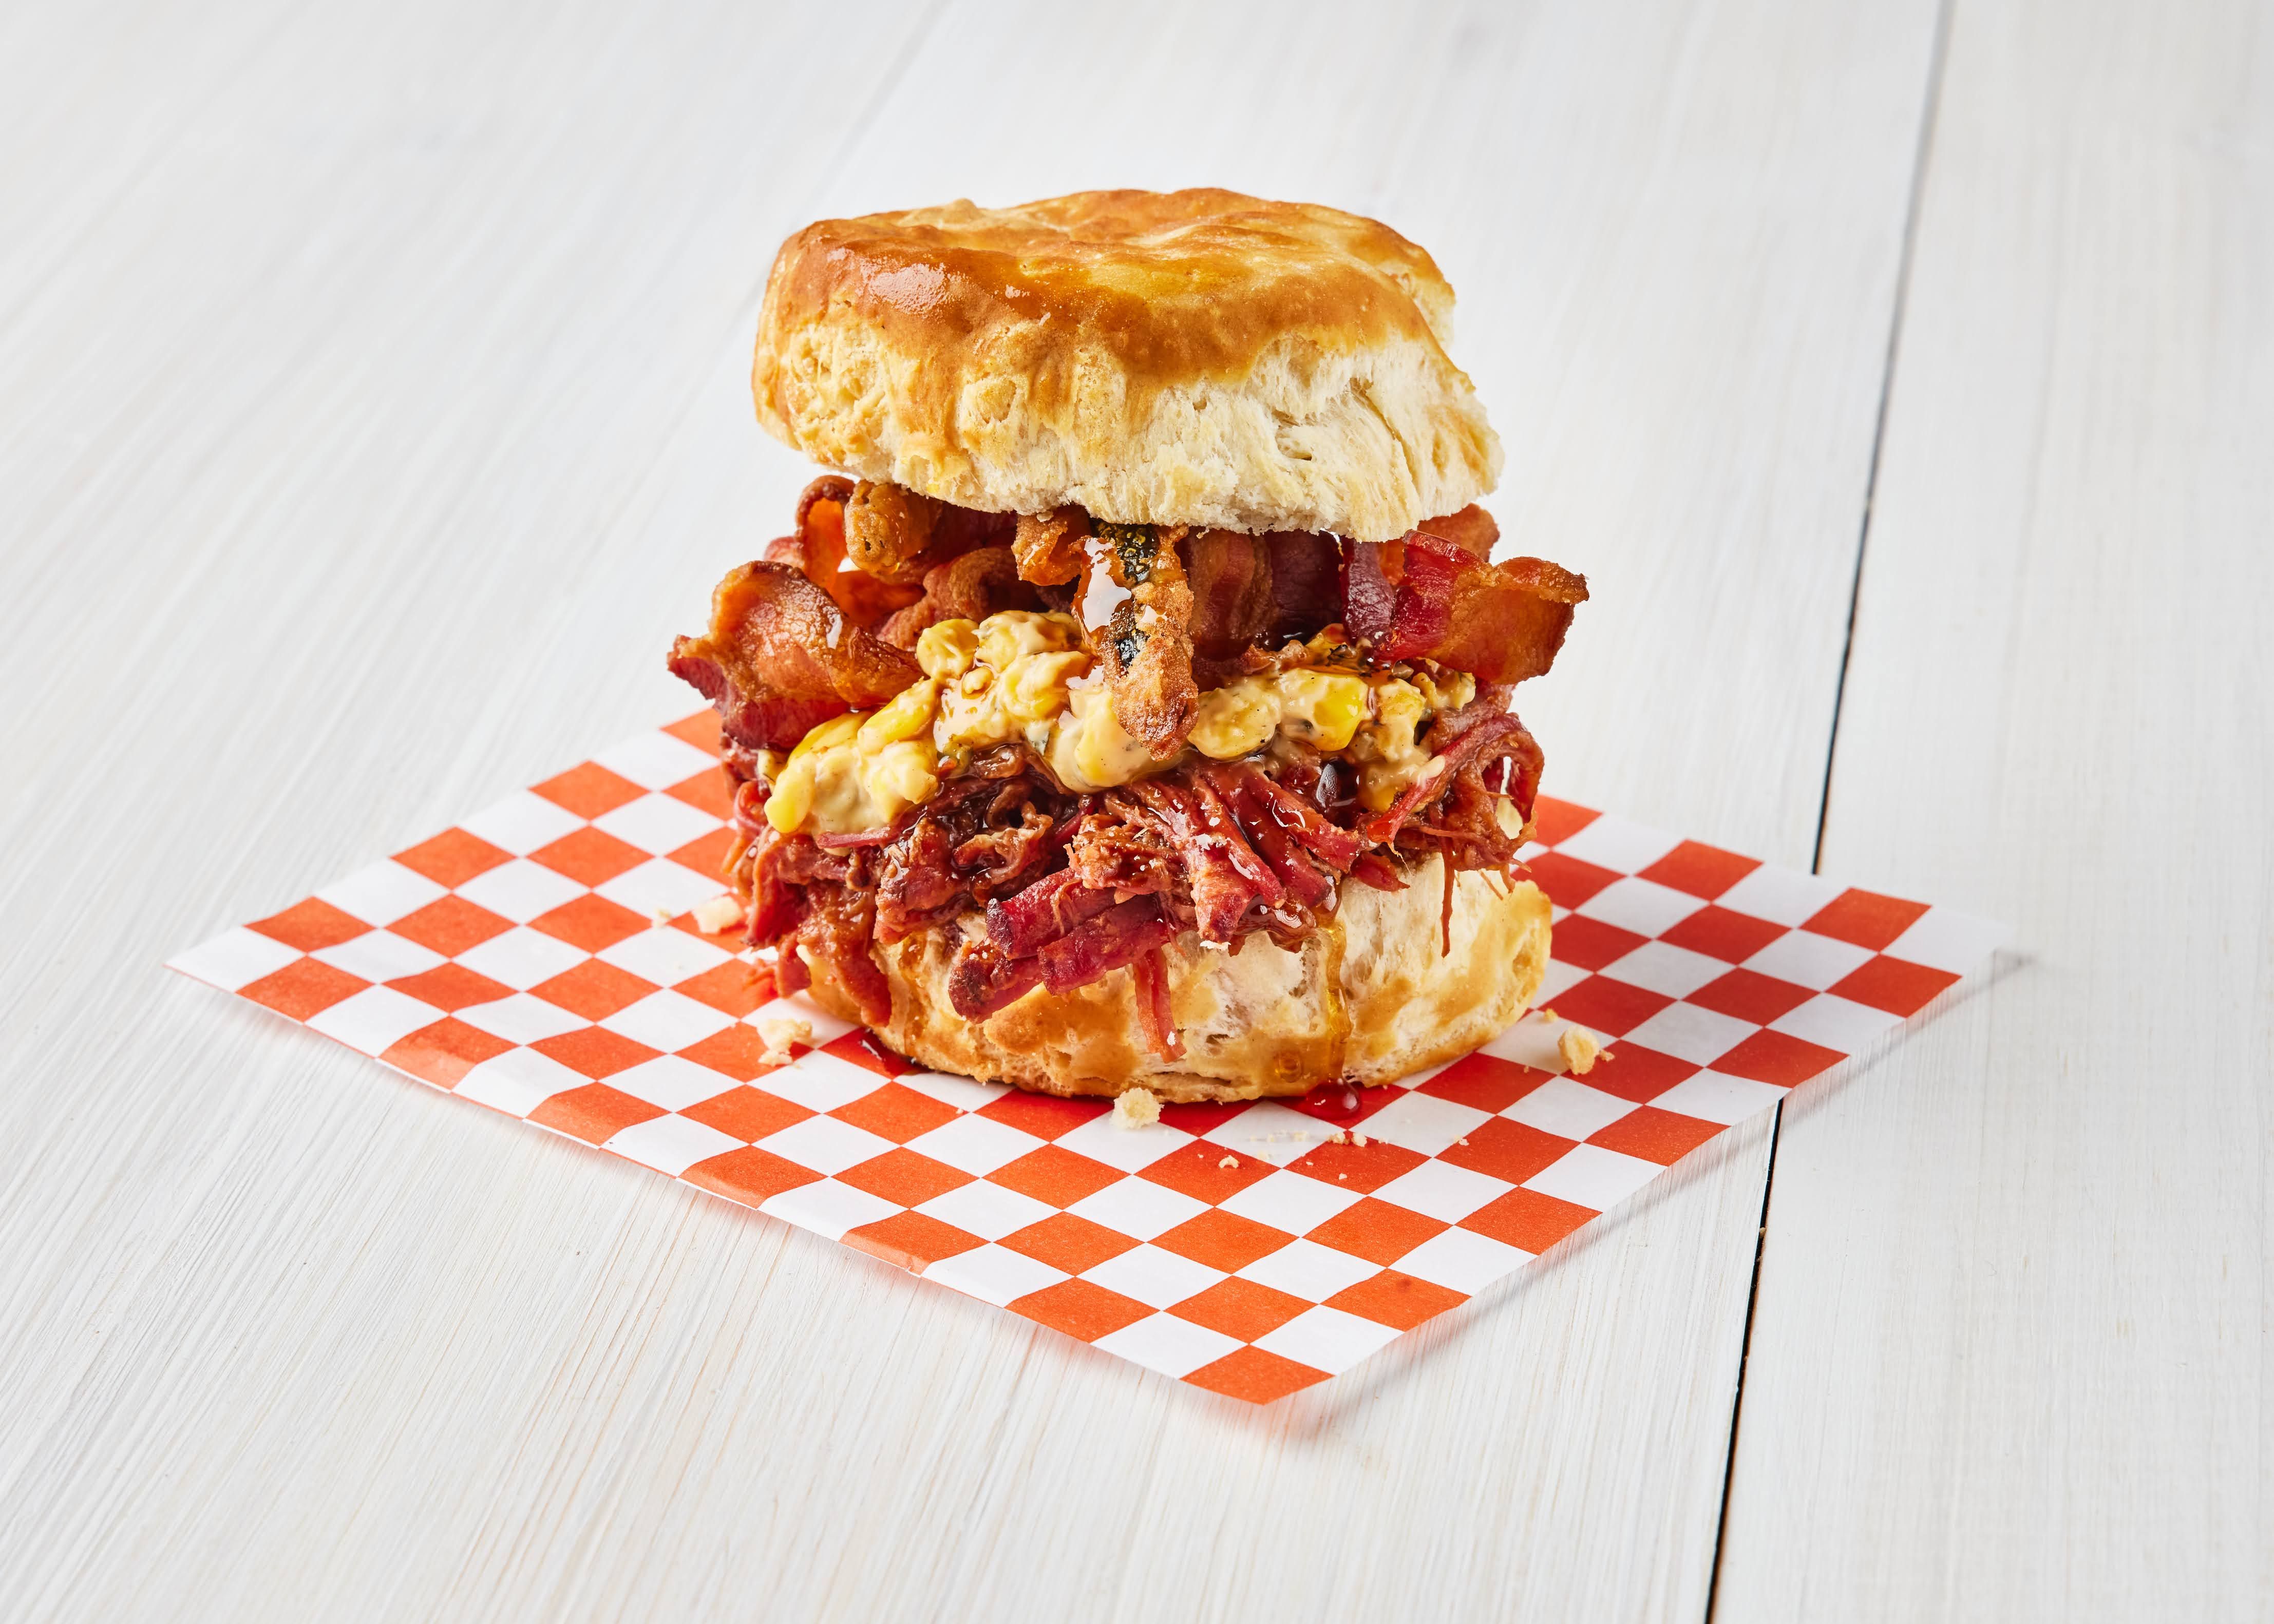 A biscuit filled with bacon and cheese